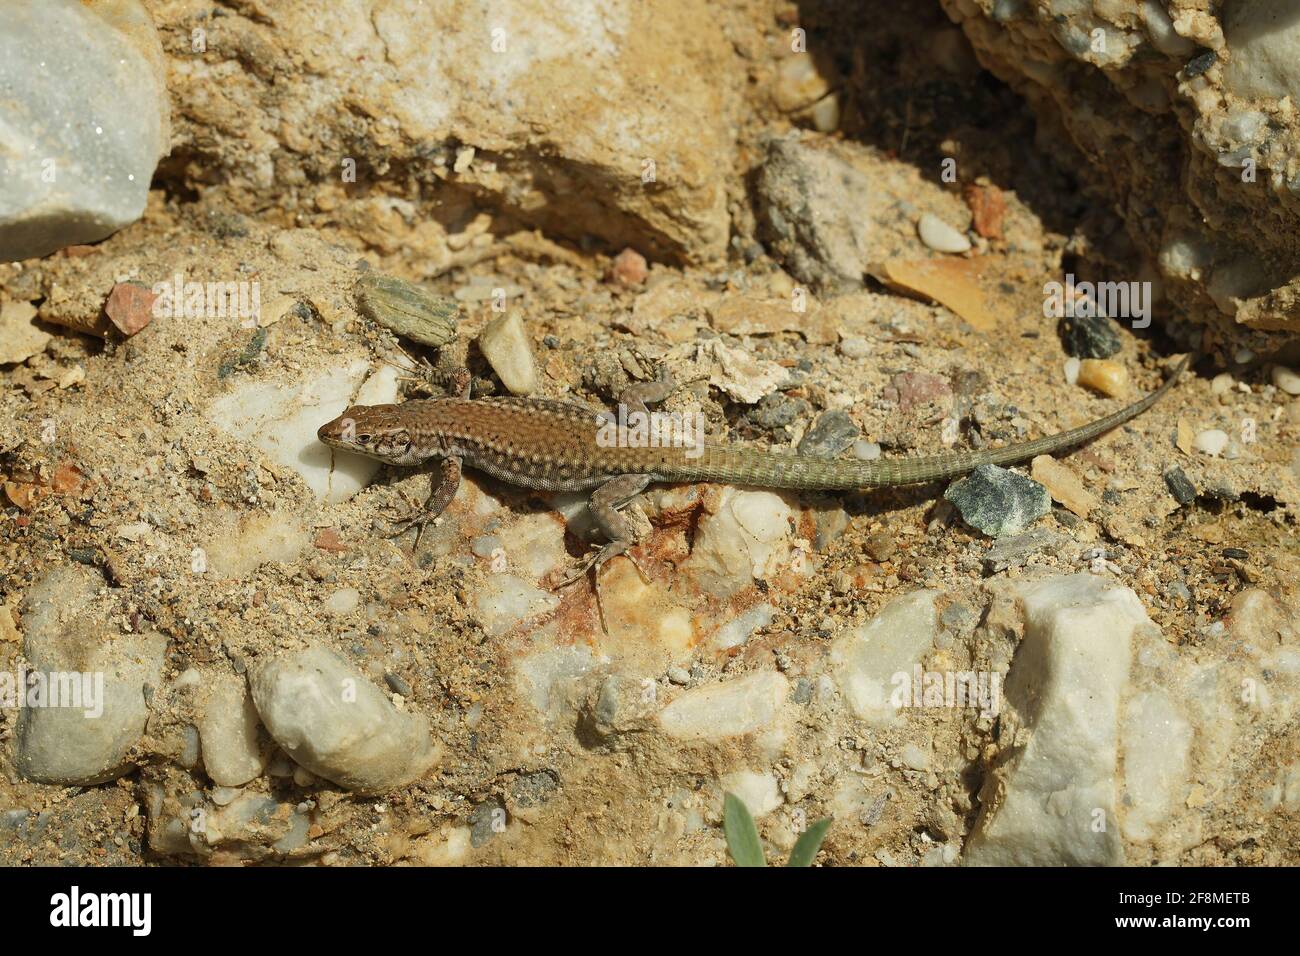 Andalusian wall lizard (Podarcis vaucheri) on the rocks in Nerja, Andalusia Stock Photo